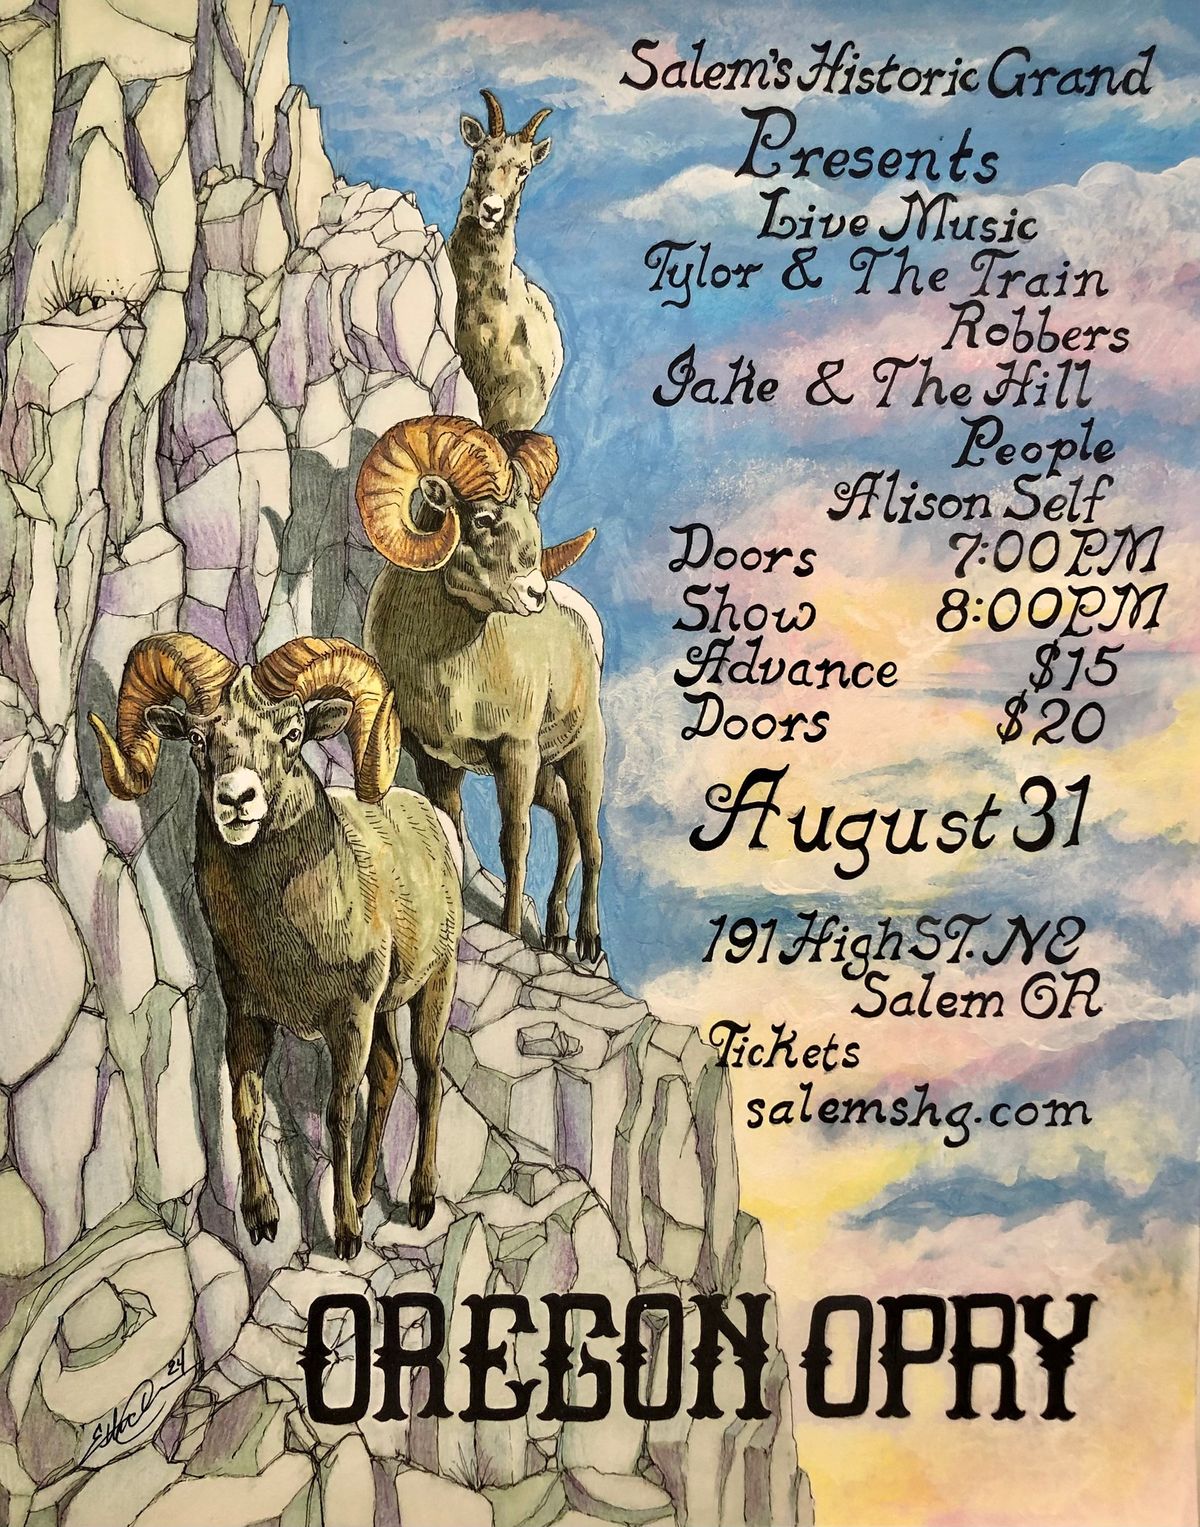 Oregon Opry Volume 6: Tylor & The Train Robbers